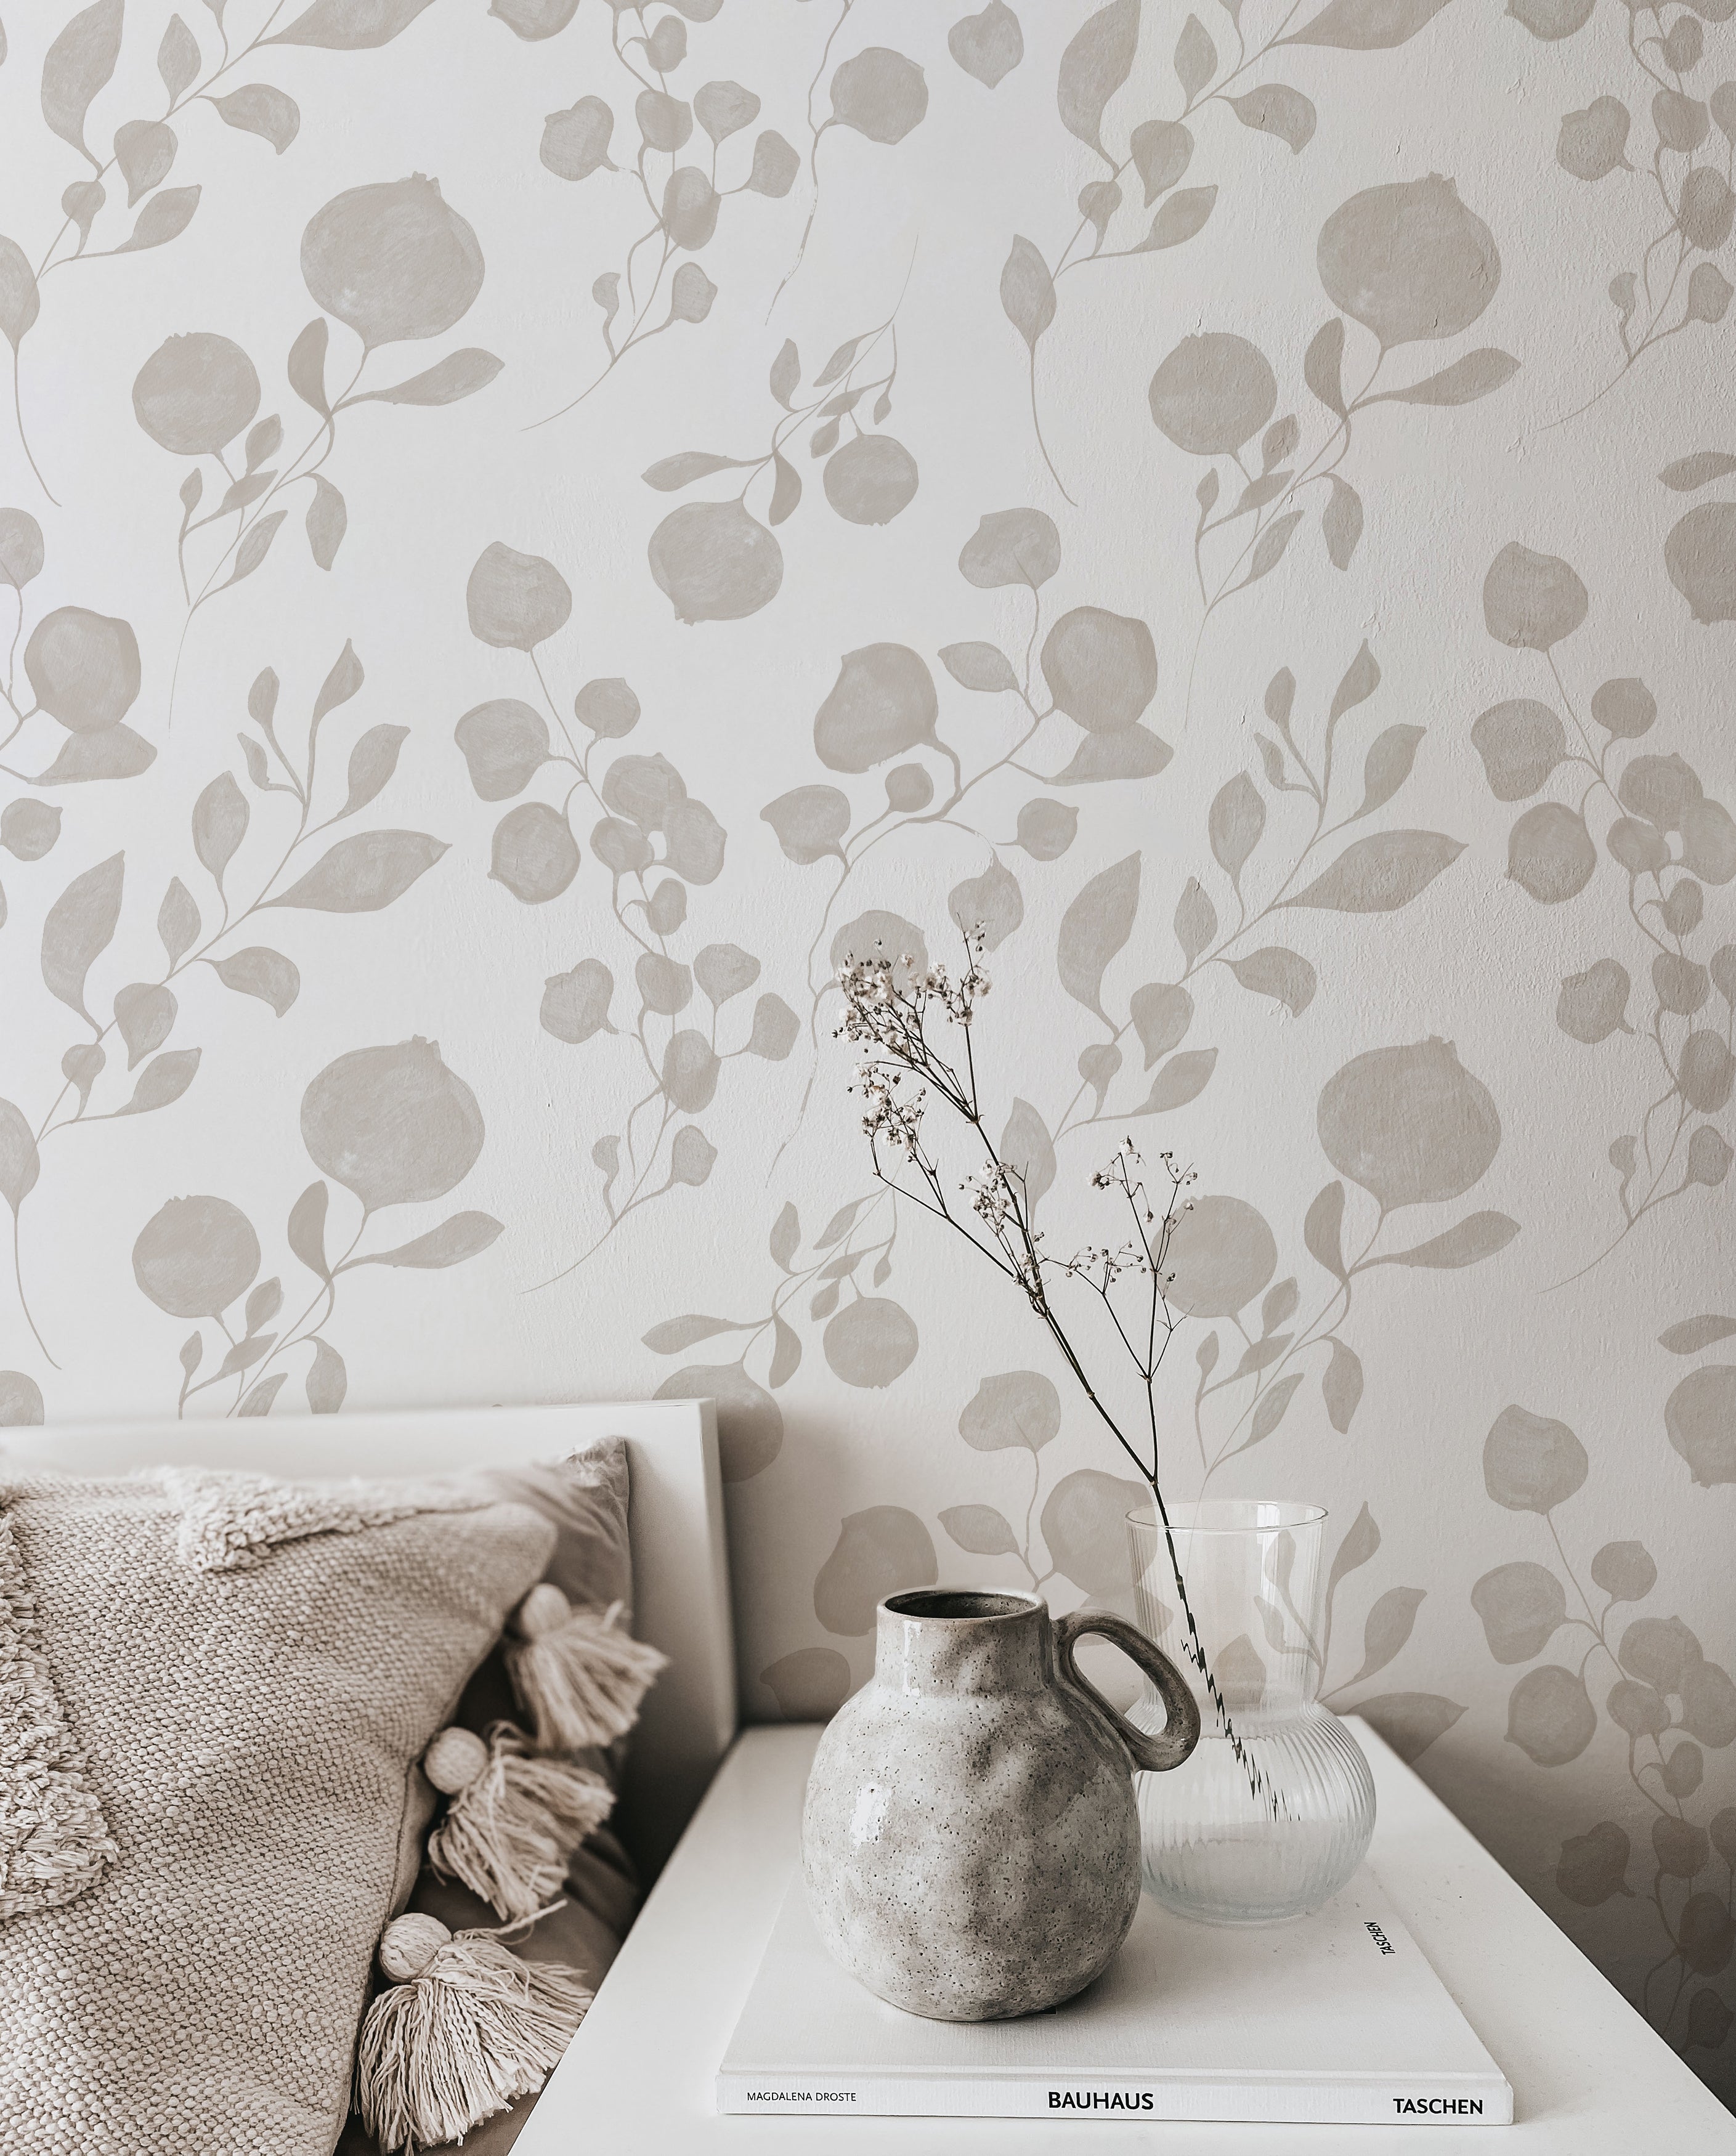 A cozy corner of a room showing the "Atelier Botanique Wallpaper" as a wall accent. A plush pillow and a rustic vase with dried flowers sit atop a side table, highlighting the wallpaper's ability to complement a peaceful and refined interior décor.